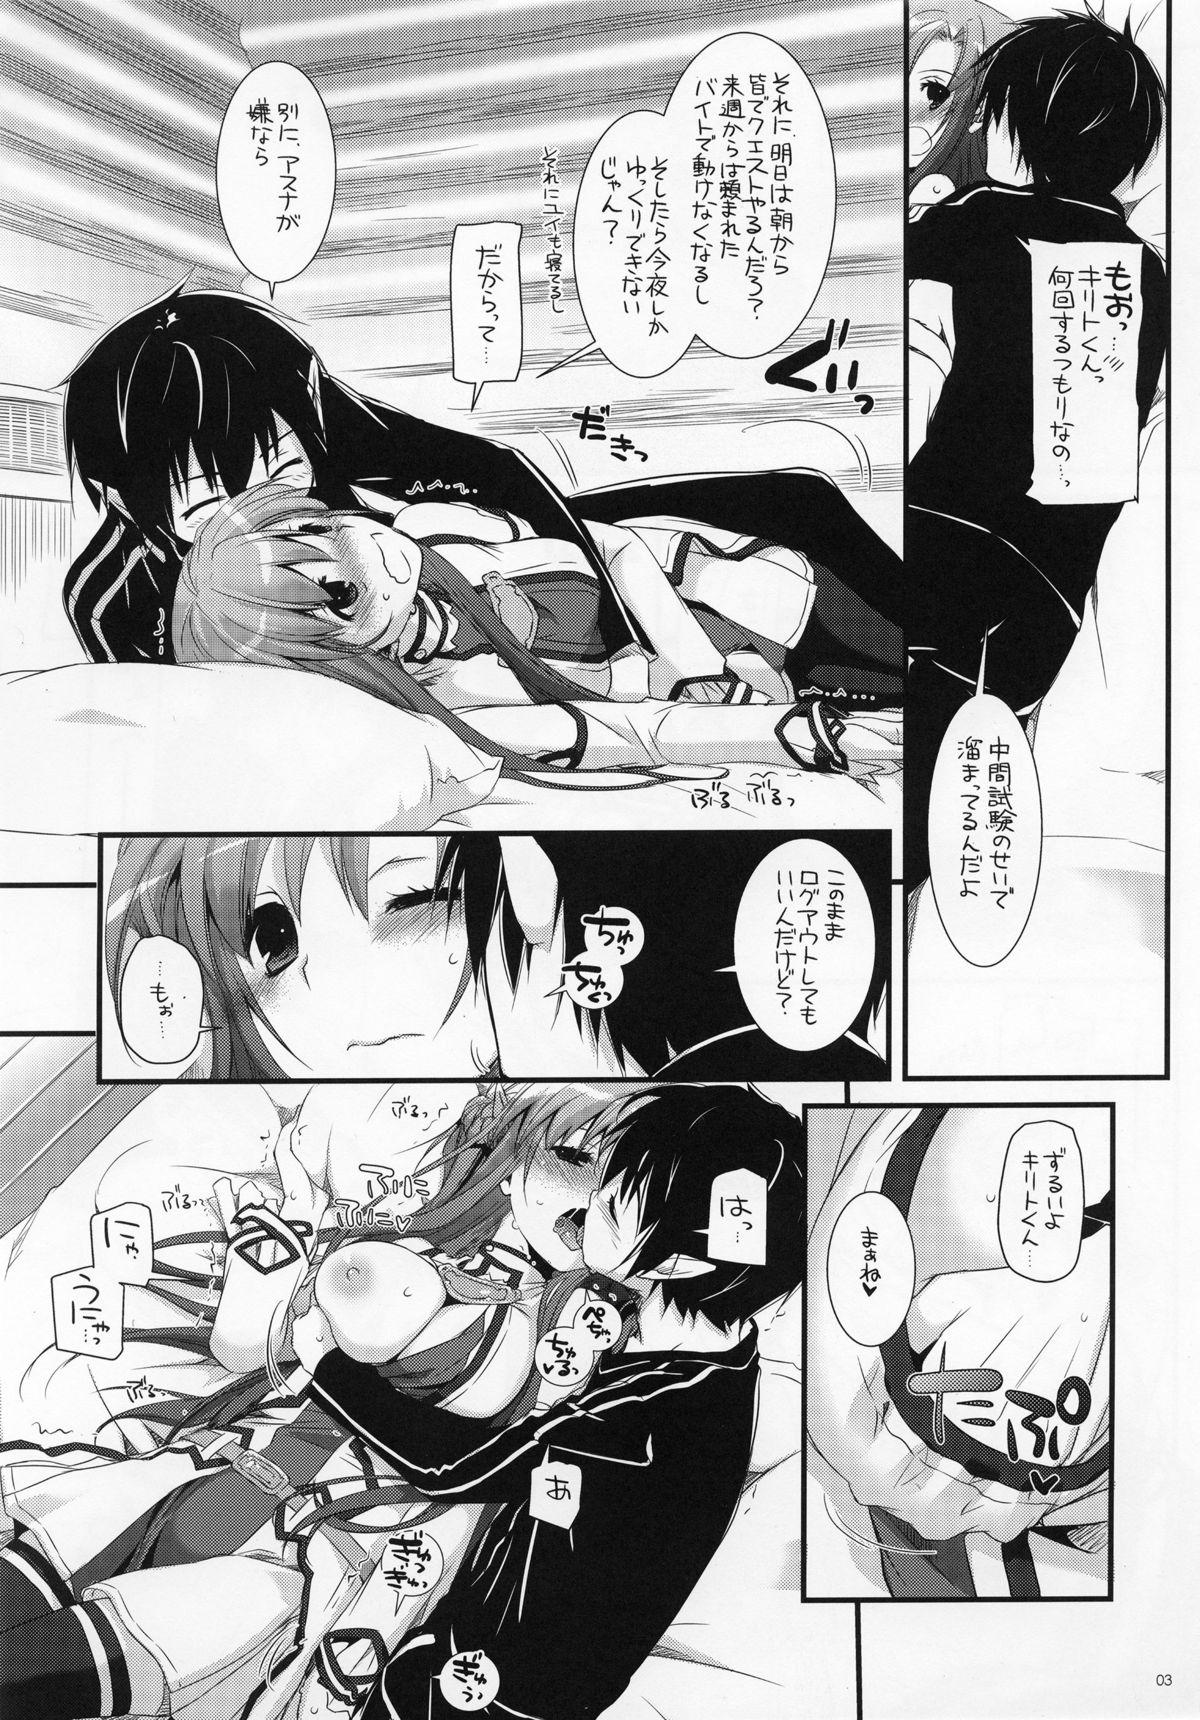 Teentube D.L. Action 72 - Sword art online Maid - Page 2